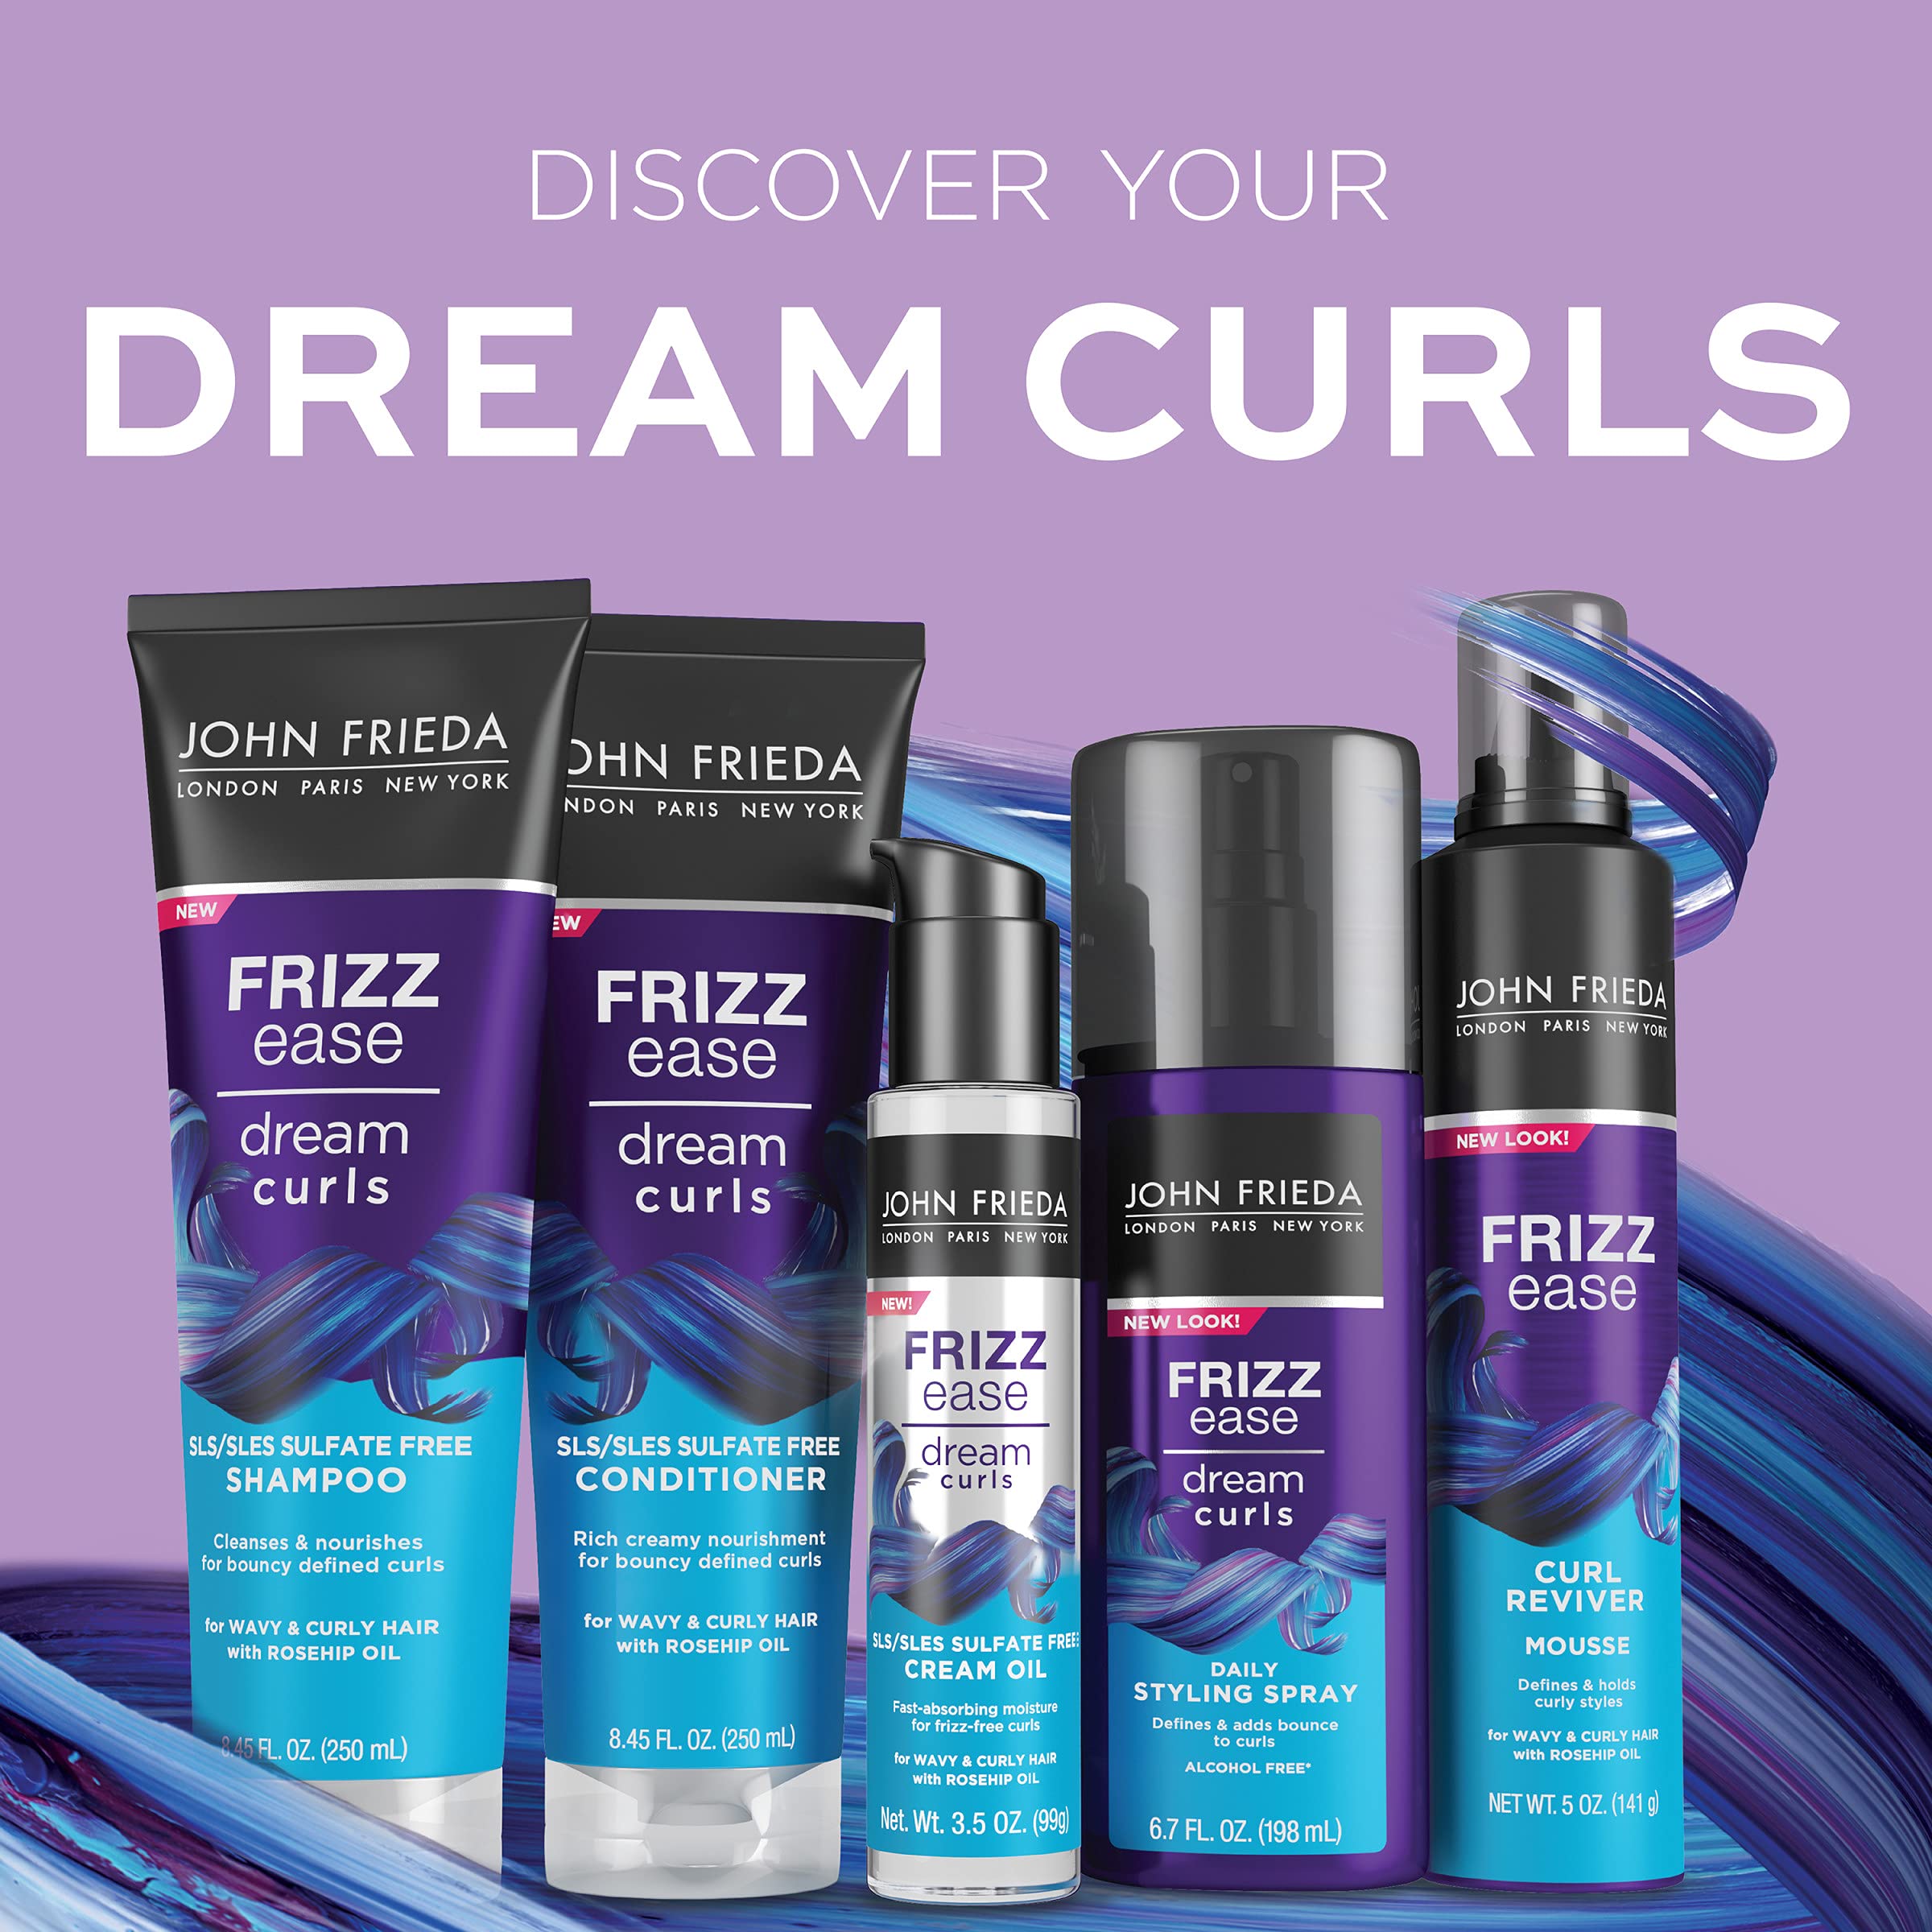 John Frieda Frizz Ease Dream Curls Curly Hair Shampoo, SLS/SLES Sulfate Free, Helps Control Frizz, with Curl Enhancing Technology, 8.45 Fluid Ounces (Pack of 2)